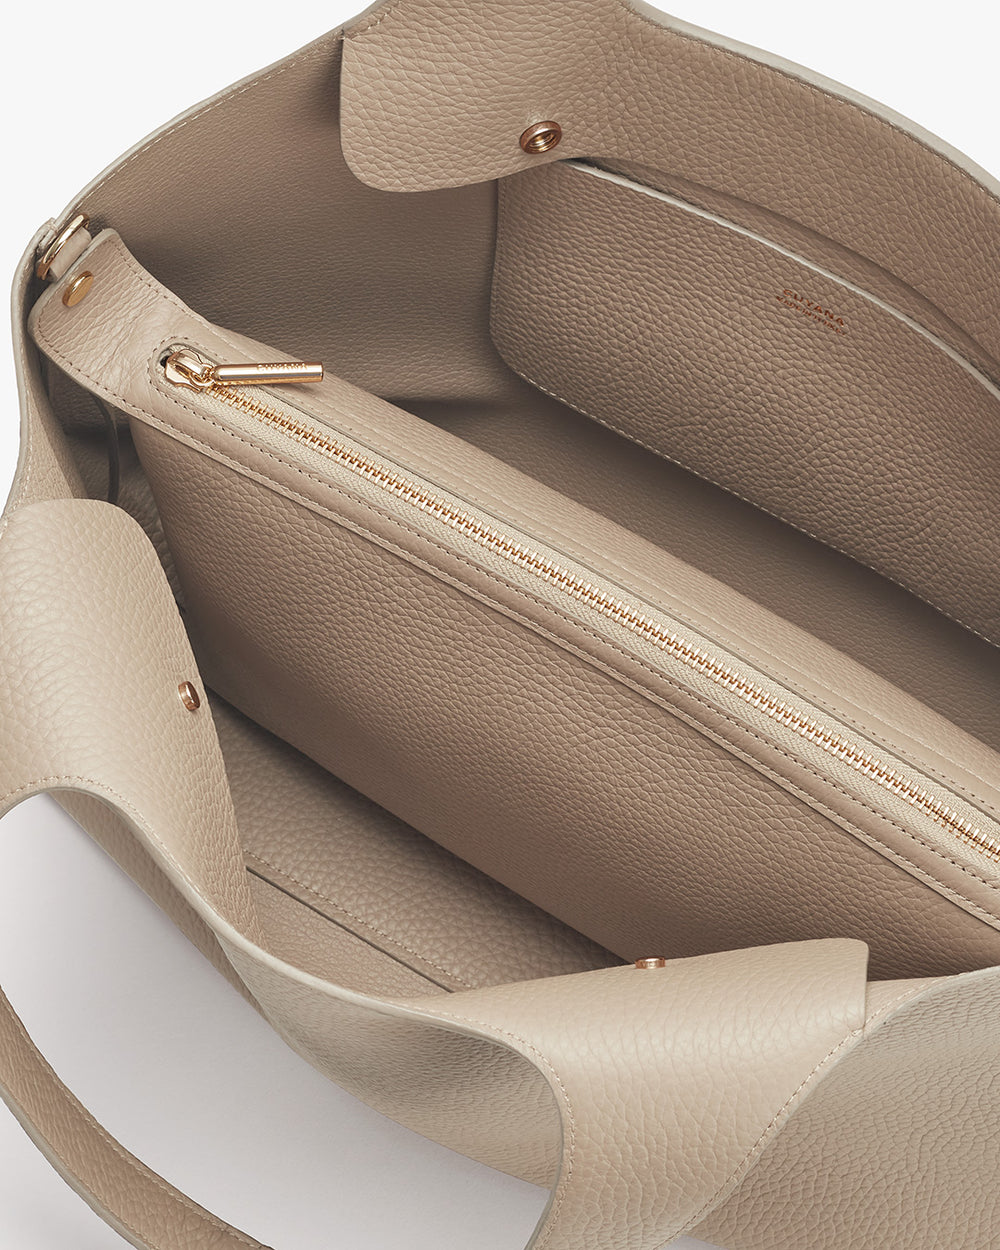 Open handbag showing internal compartments and zipped section.